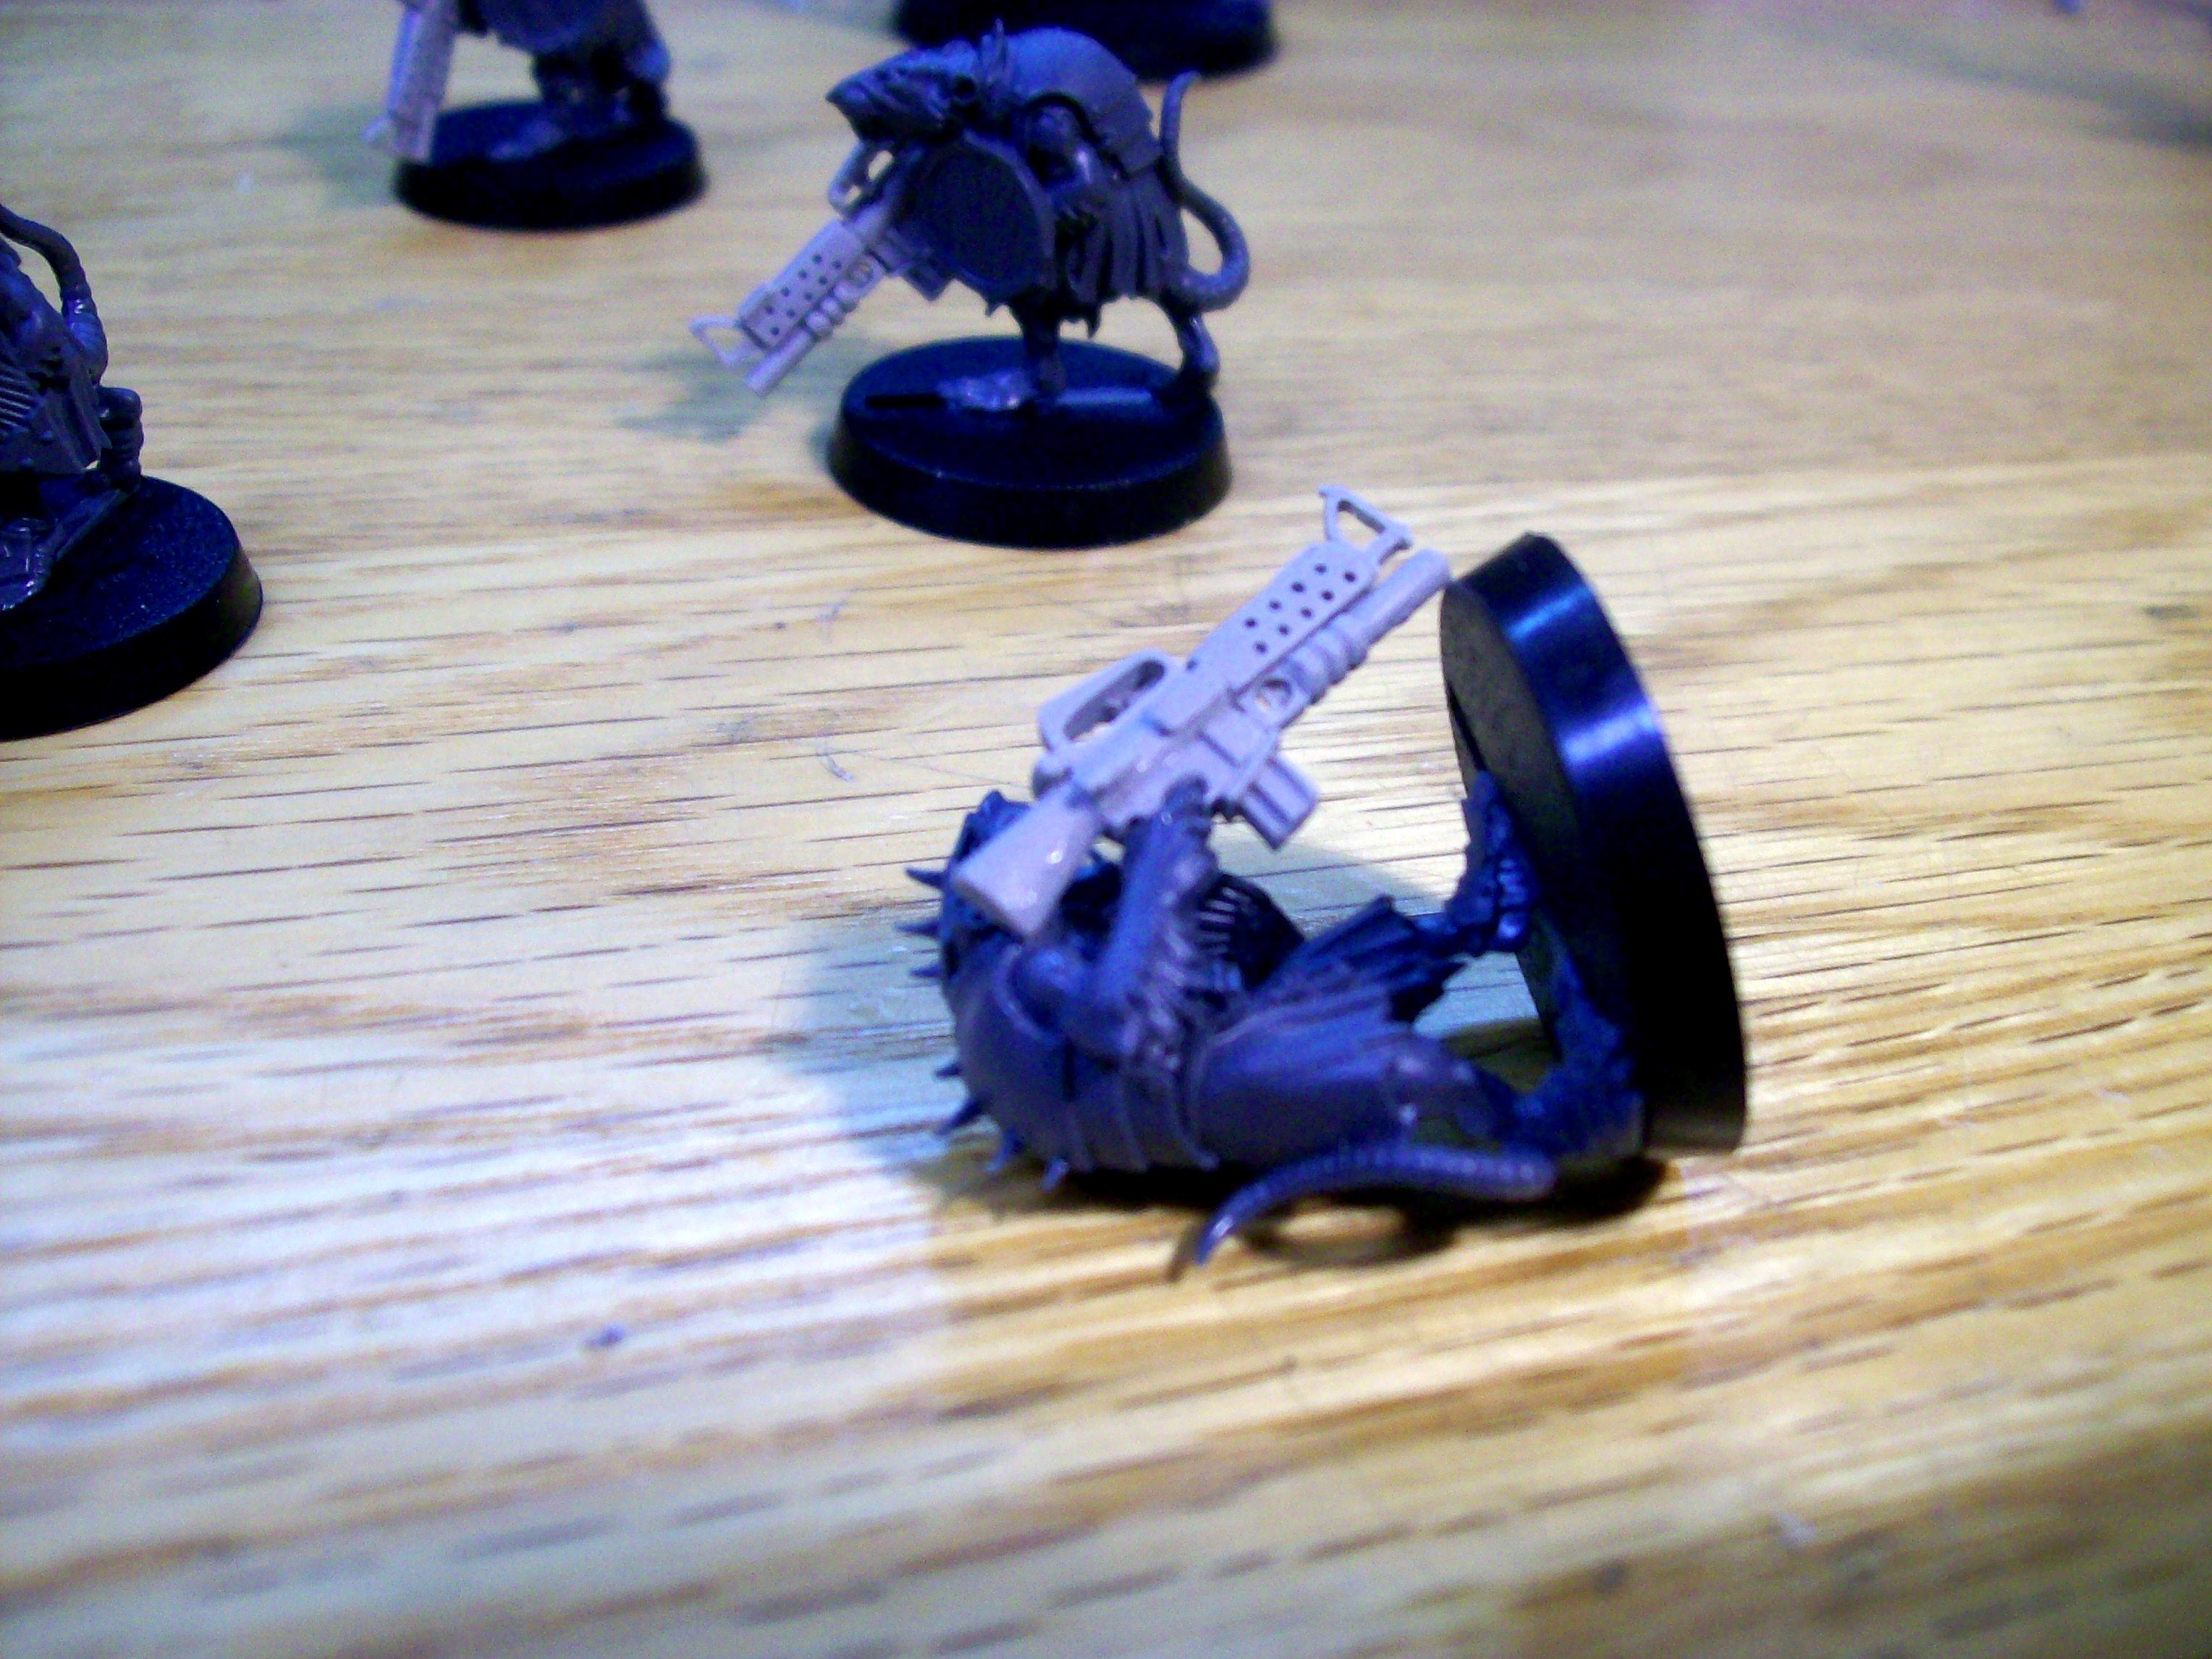 Conversion, Skaven, Once Again, The Finger!